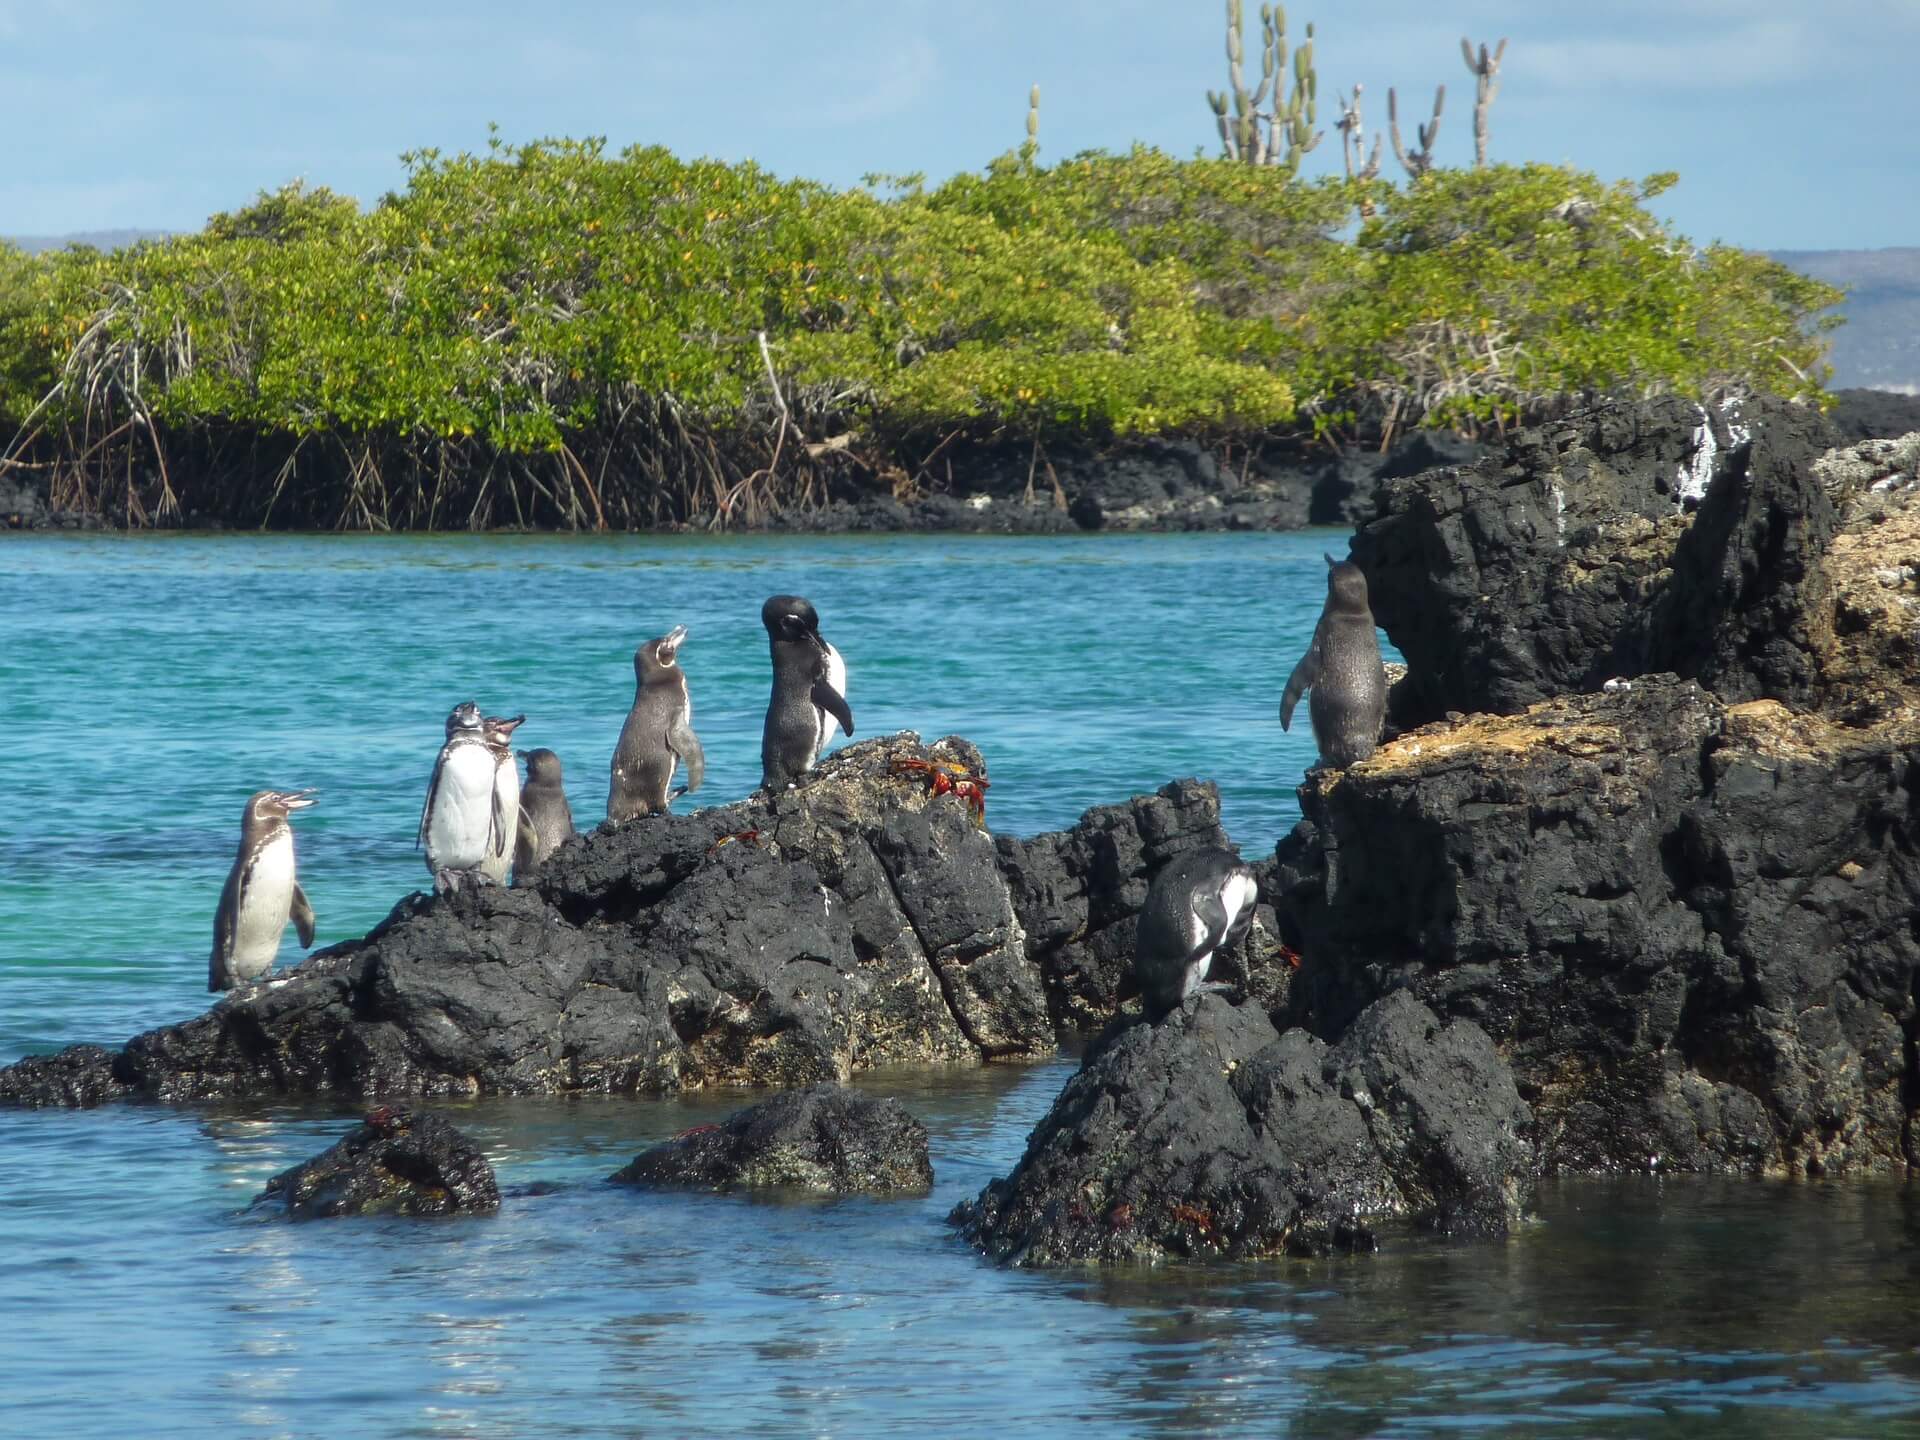 A group of small white and gray Galápagos penguins stand on rocks emerging from a blue sea. Photo: Sebastian_photos